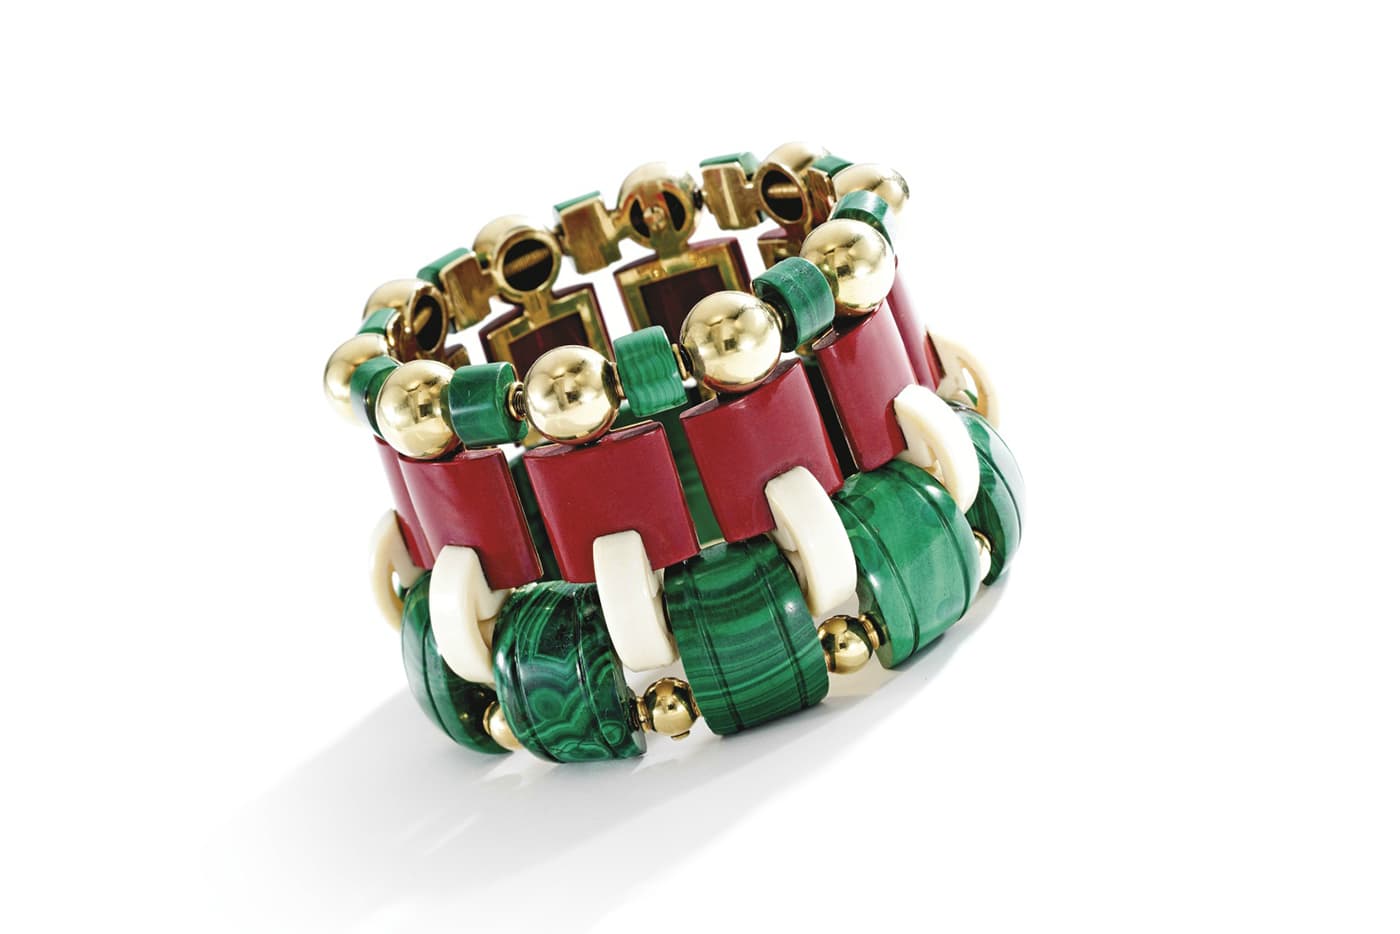 This important vintage malachite, Purpurin and ivory bracelet by Boucheron is one of Stephane’s greatest finds. He sold it in New York in 2008 for more than $800,000